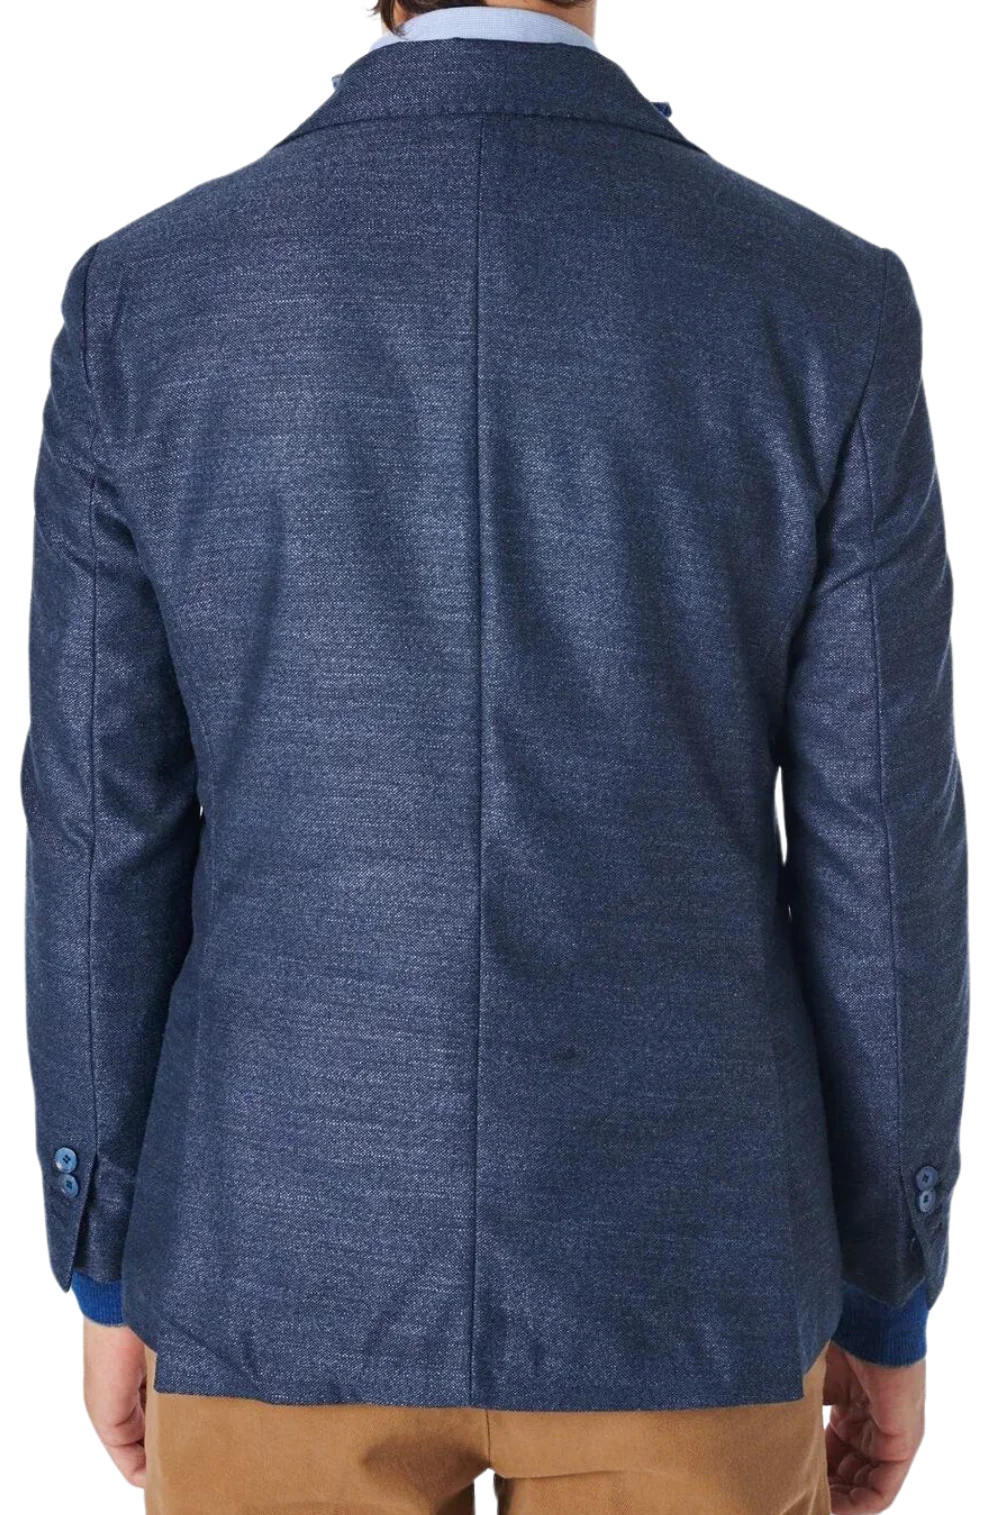 Men's Fusaro Austine Melange Wool Blend Jacket in Blue (21089) - available in-store, 337 Monty Naicker Street, Durban CBD or online at Omar's Tailors & Outfitters online store.   A men's fashion curation for South African men - established in 1911.